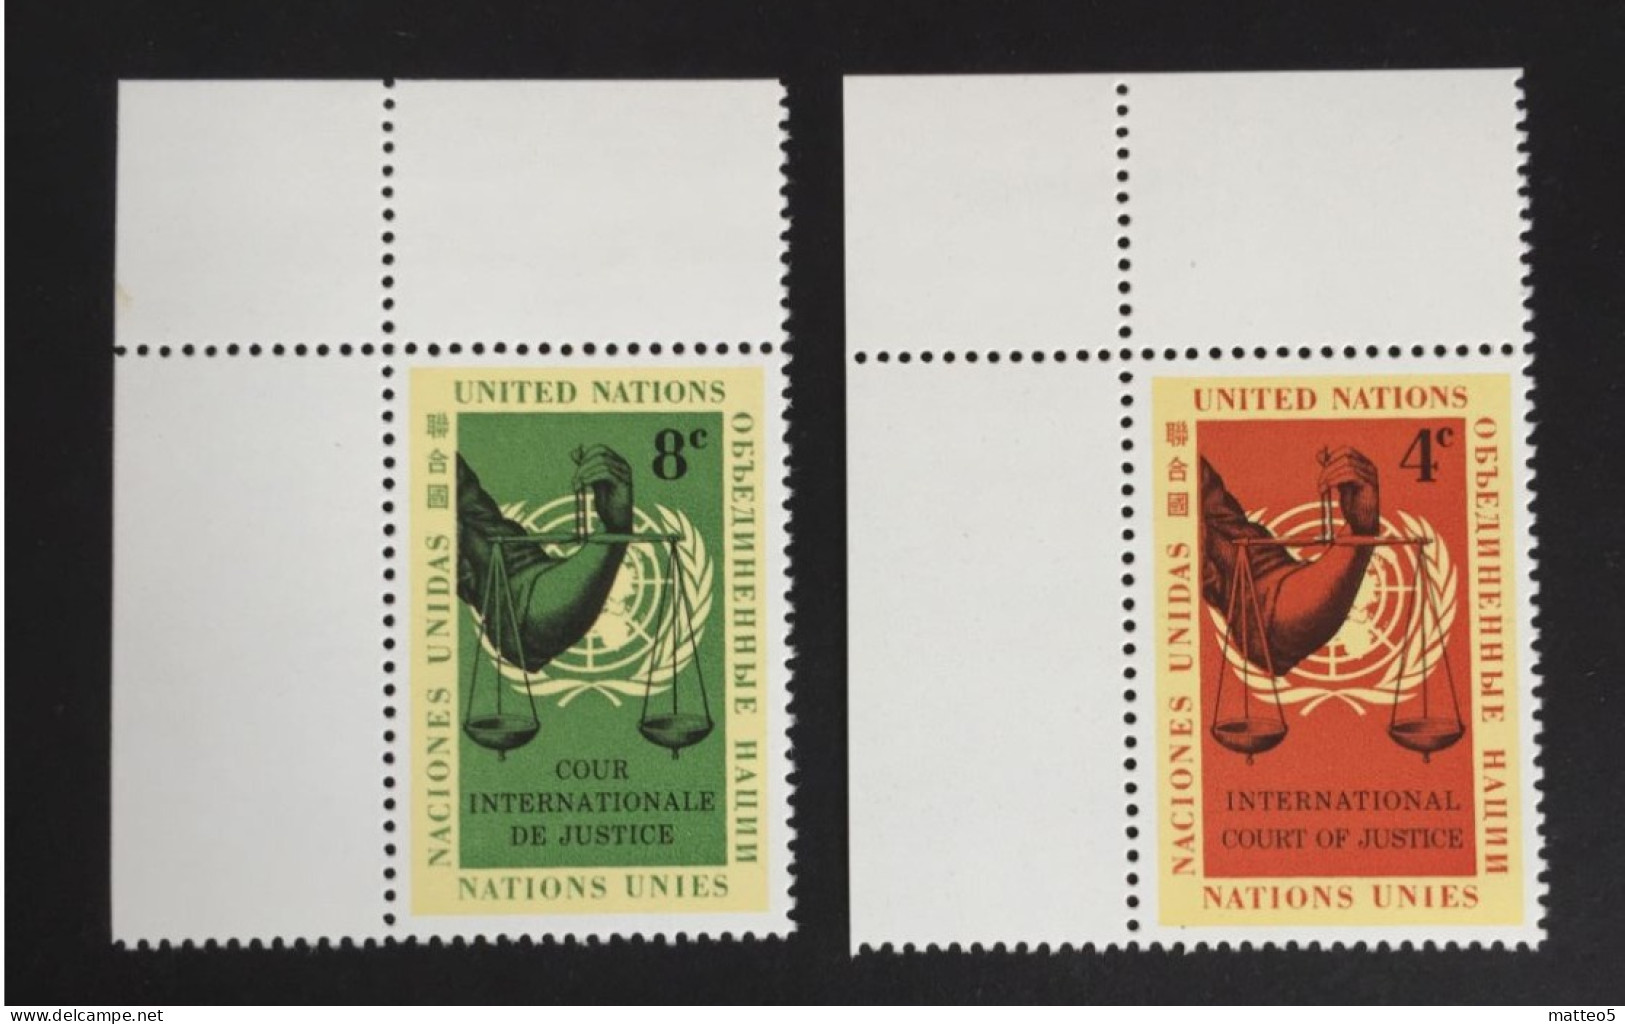 1961 - United Nations UNO UN - International Court Of Justice - Pair Of Scales - 2 Stamps Unused - Unused Stamps